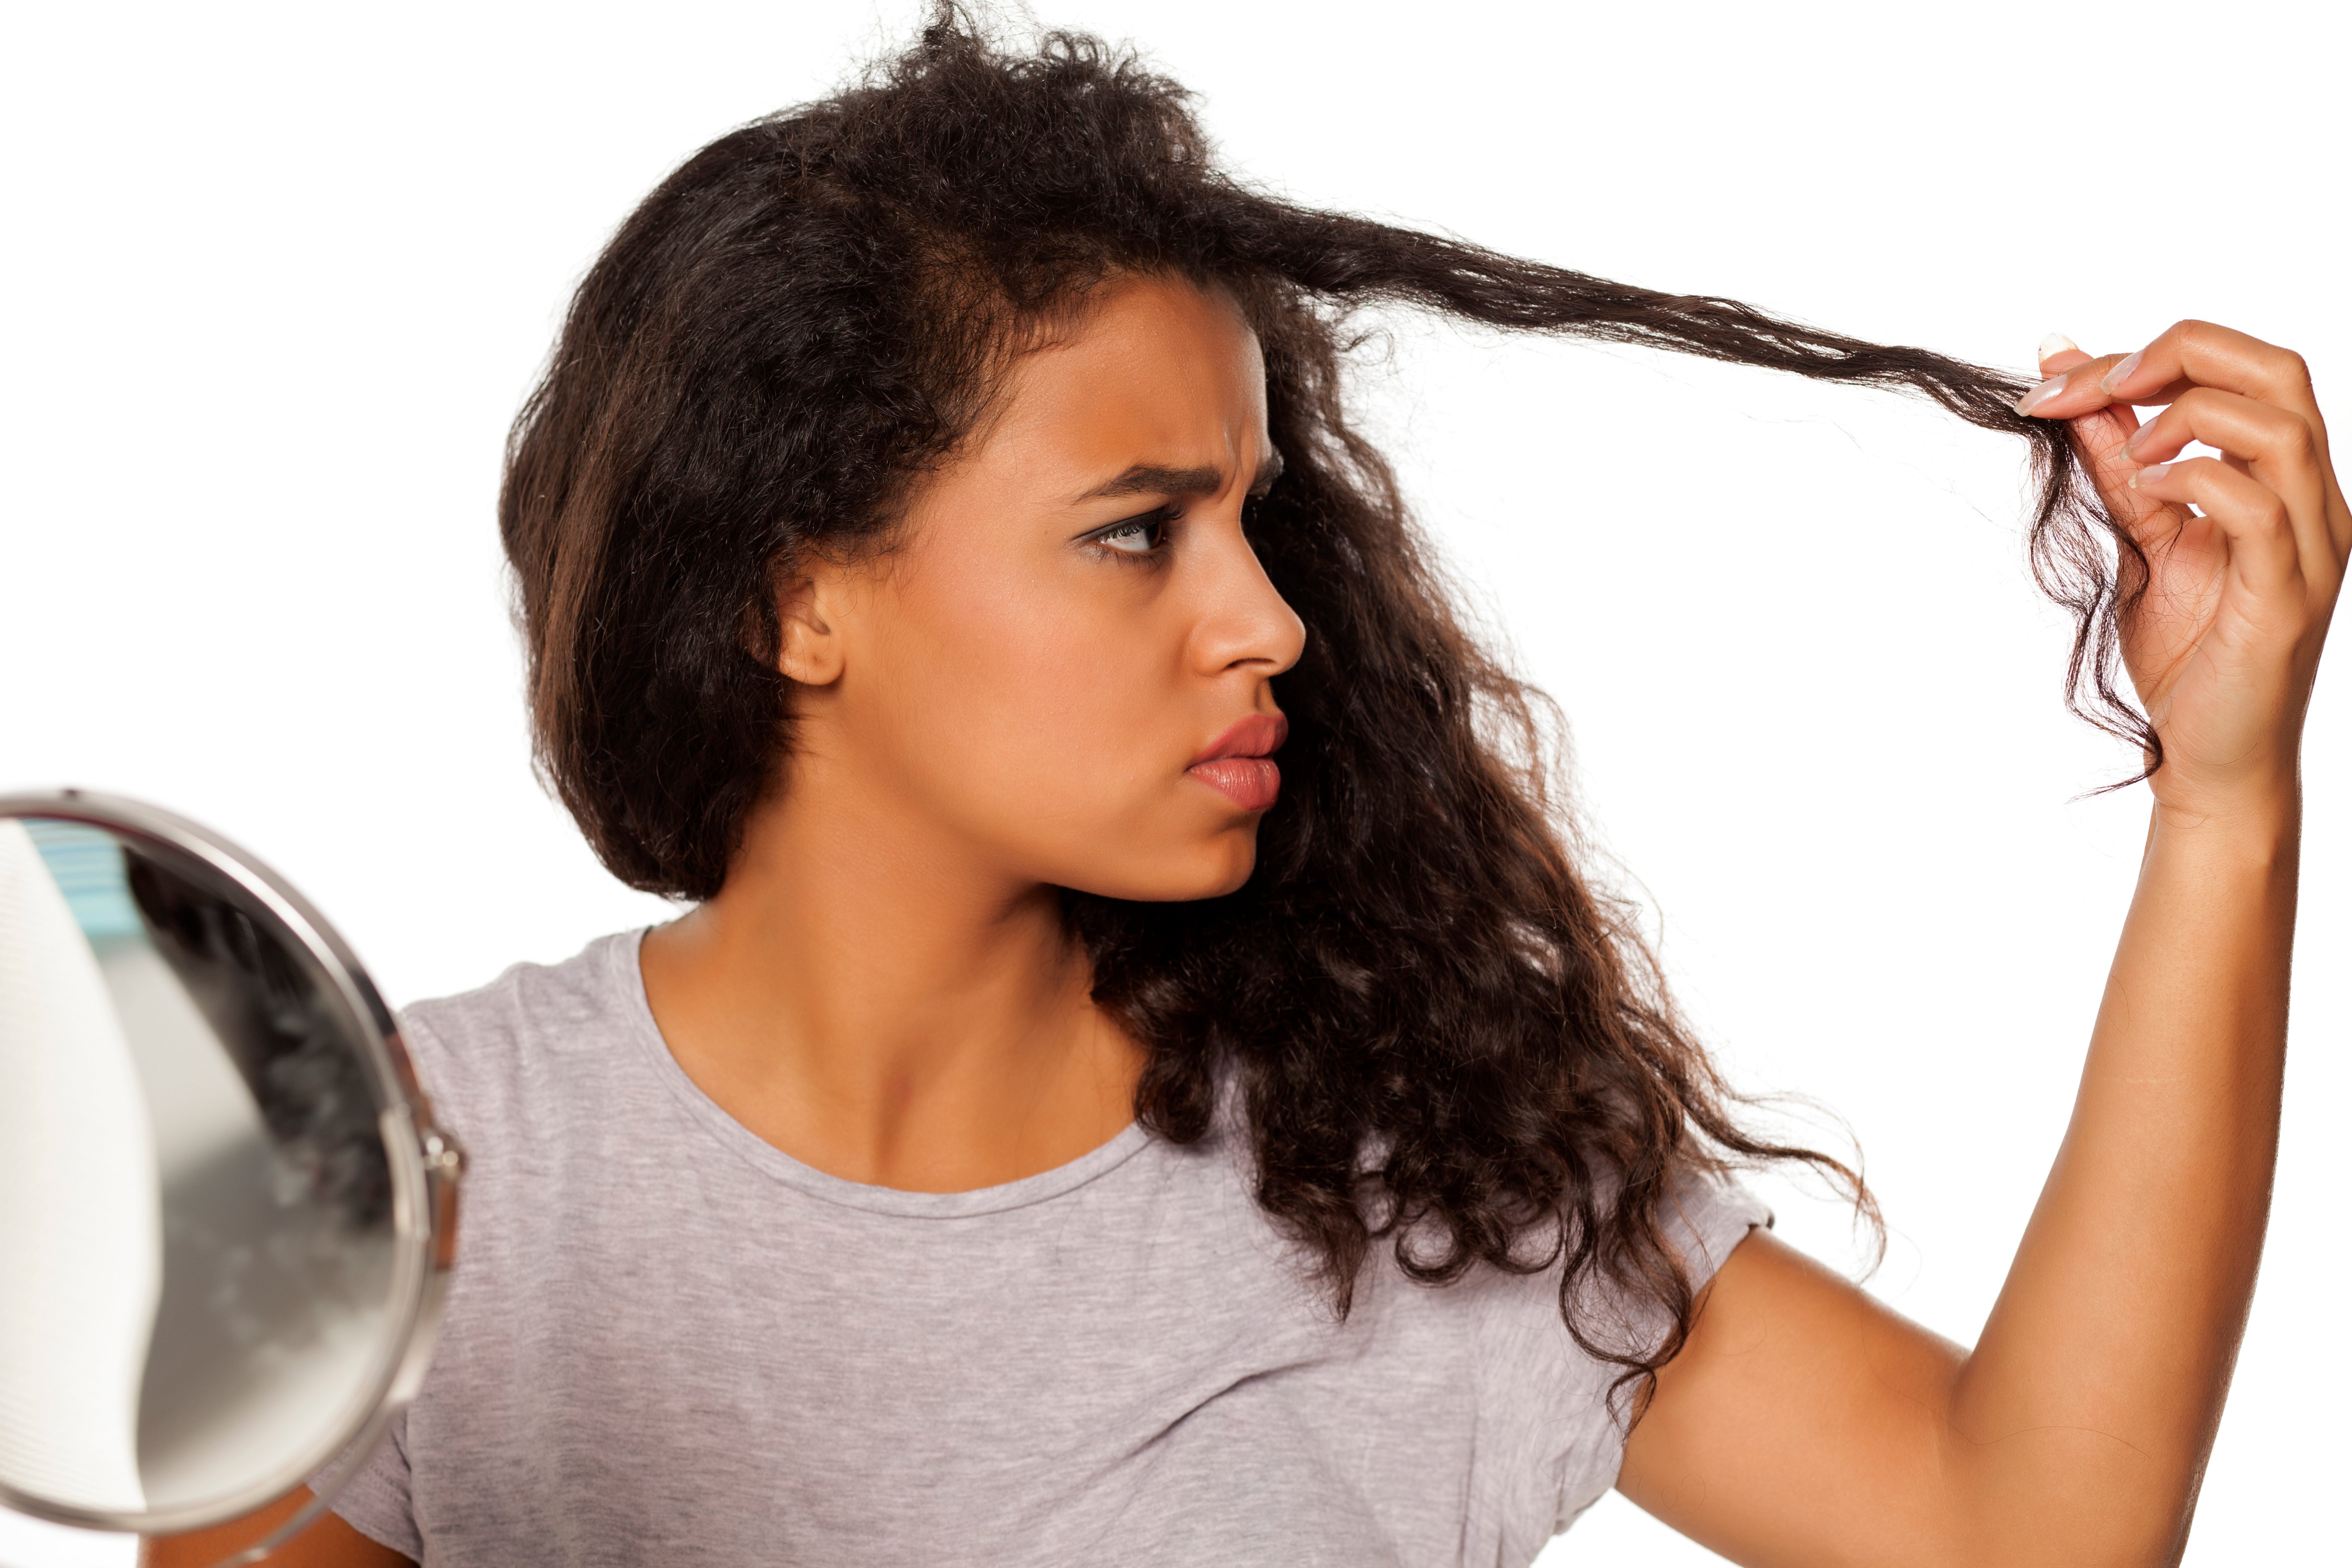 A woman worryingly examining a section of her hair | Source: Shutterstock